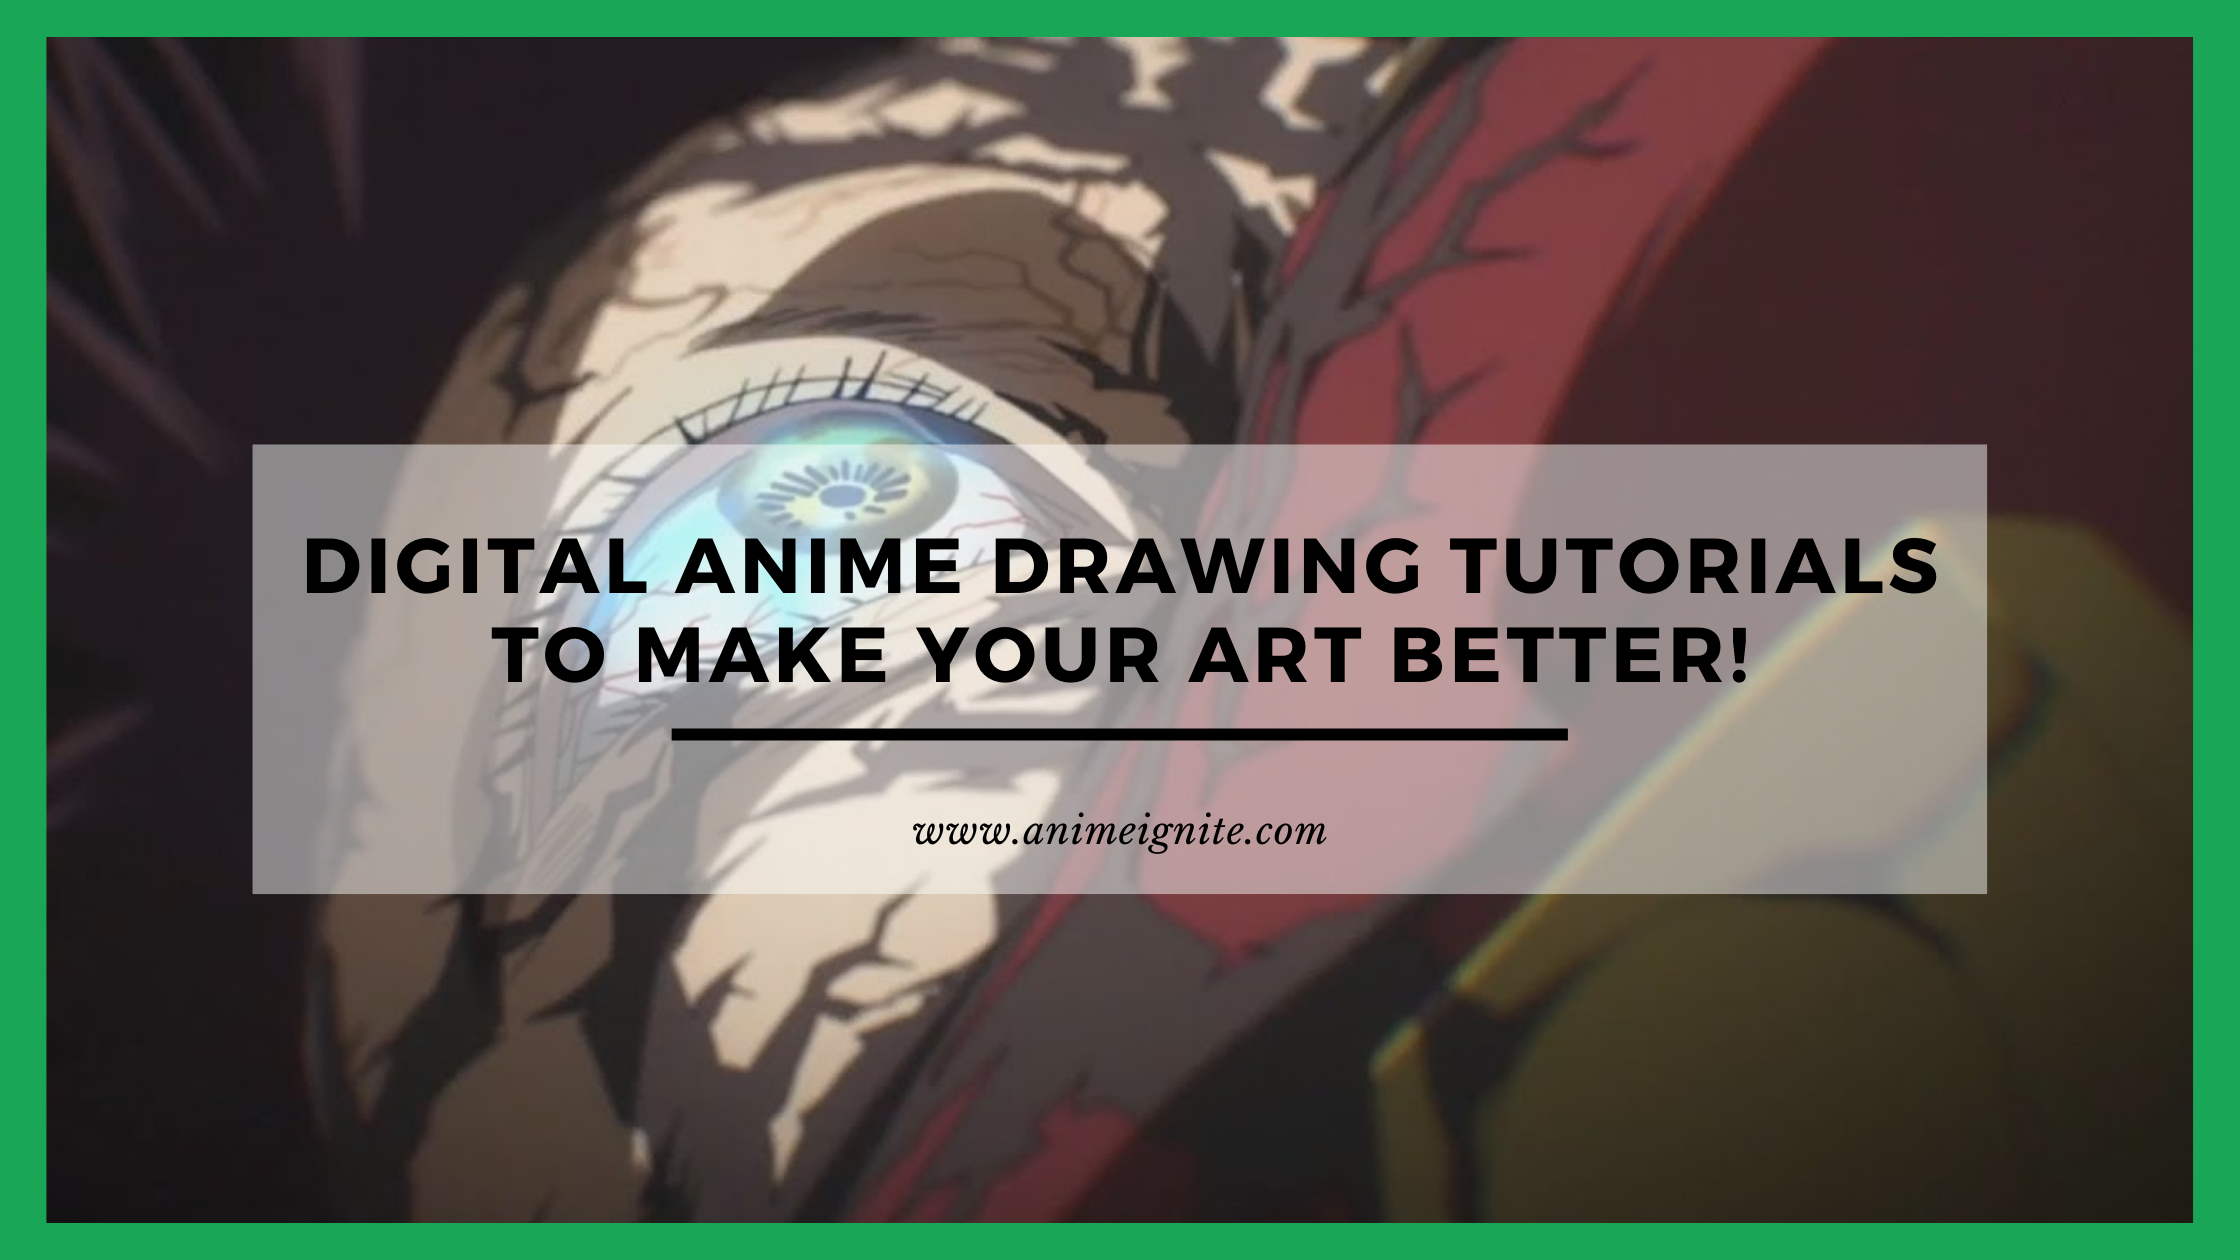 Digital Anime Drawing tutorial to make your art better!